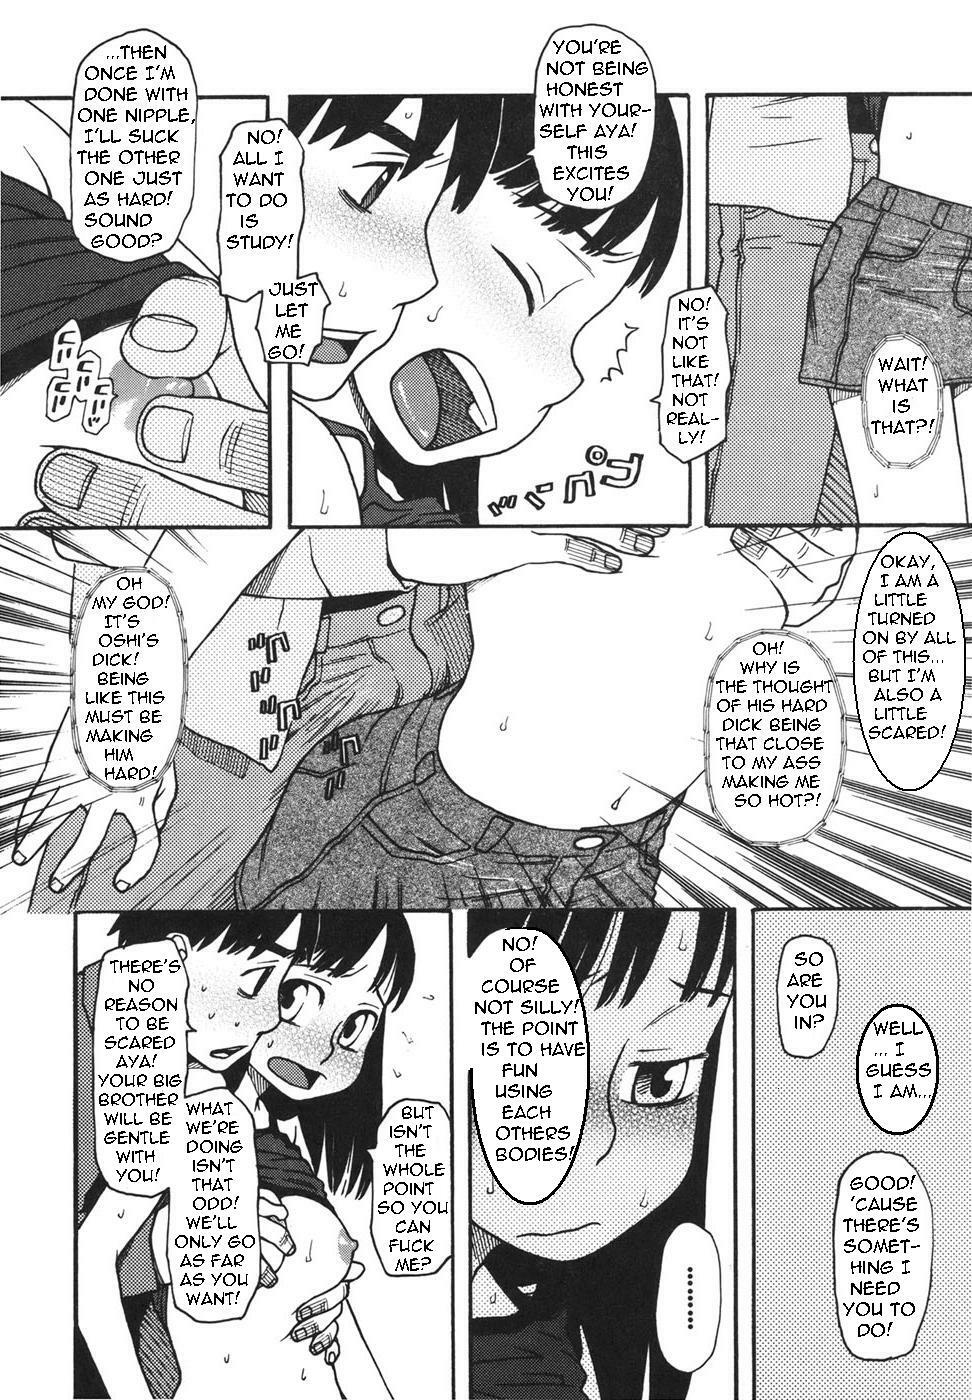 Her Brother Talks Her Into It [English] [Rewrite] [Bolt] page 9 full